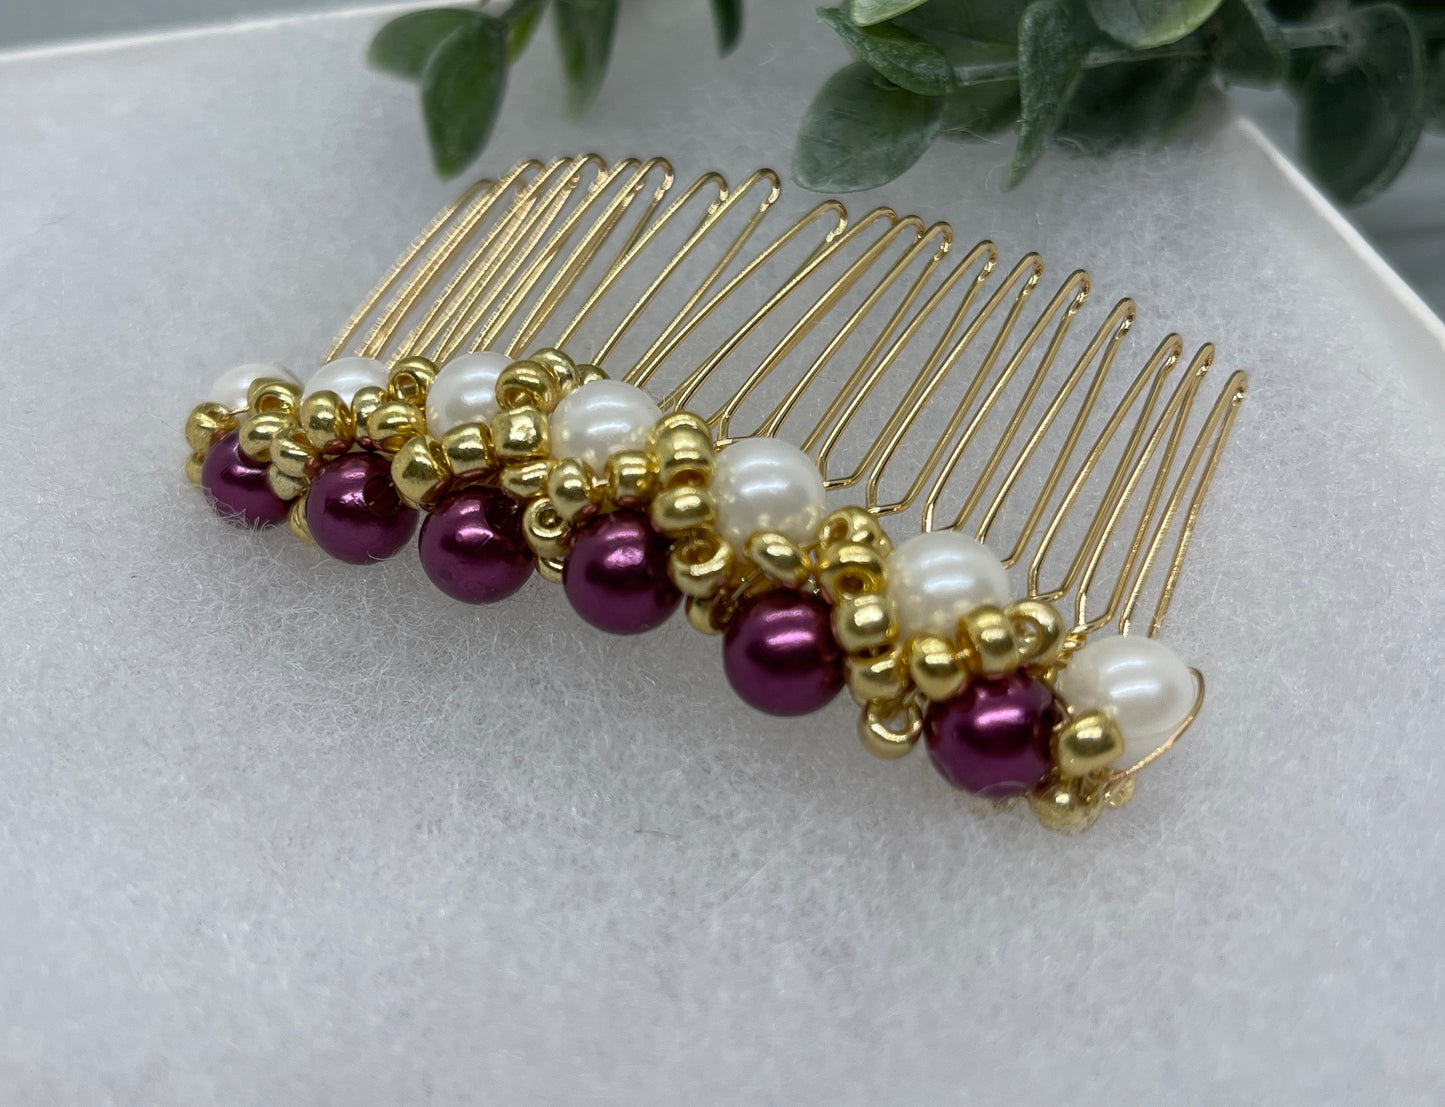 Purple White  gold beaded side Comb 3.5” gold Metal hair Accessories bridesmaid birthday princess wedding gift handmade accessories